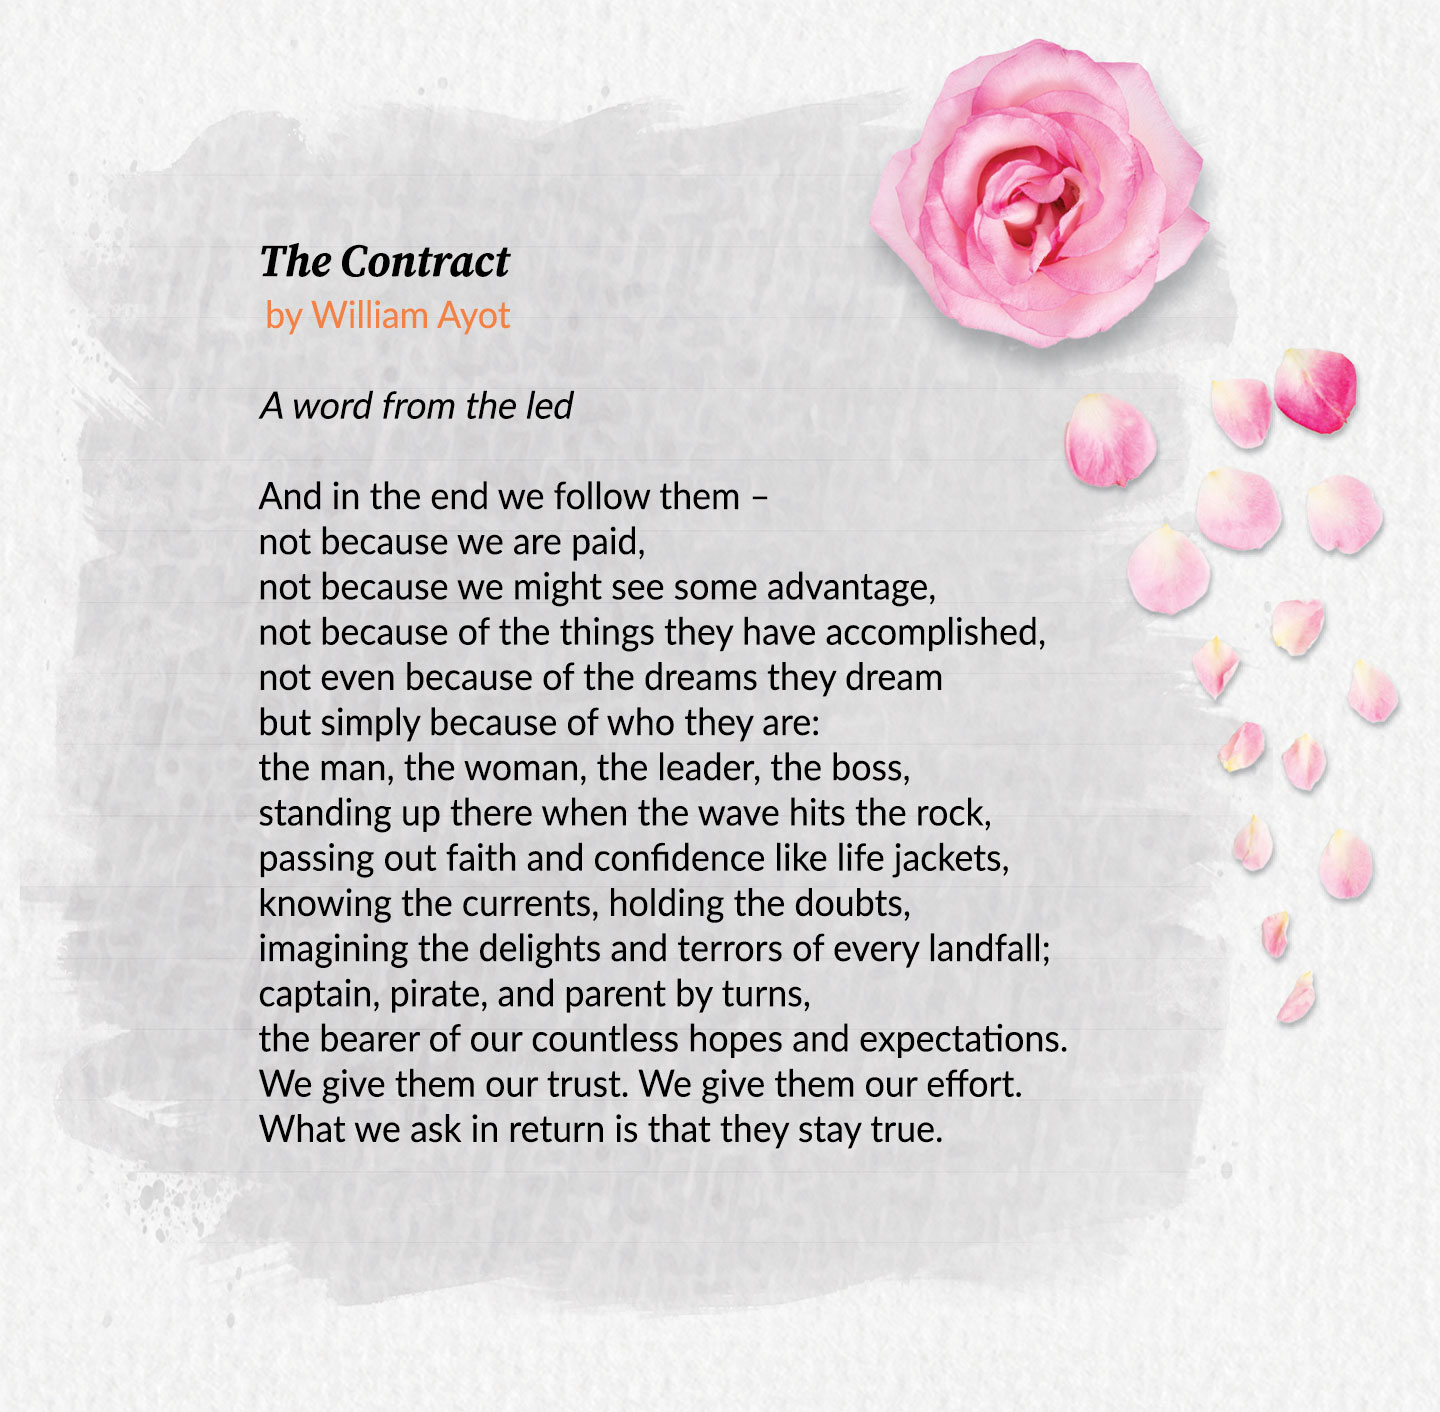 The Contract, by William Ayot. A word from the led. And in the end we follow them – not because we are paid, not because we might see some advantage, not because of the things they have accomplished, not even because of the dreams they dream but simply because of who they are: the man, the woman, the leader, the boss, standing up there when the wave hits the rock, passing out faith and confidence like life jackets, knowing the currents, holding the doubts, imagining the delights and terrors of every landfall; captain, pirate, and parent by turns, the bearer of our countless hopes and expectations. We give them our trust. We give them our effort. What we ask in return is that they stay true.